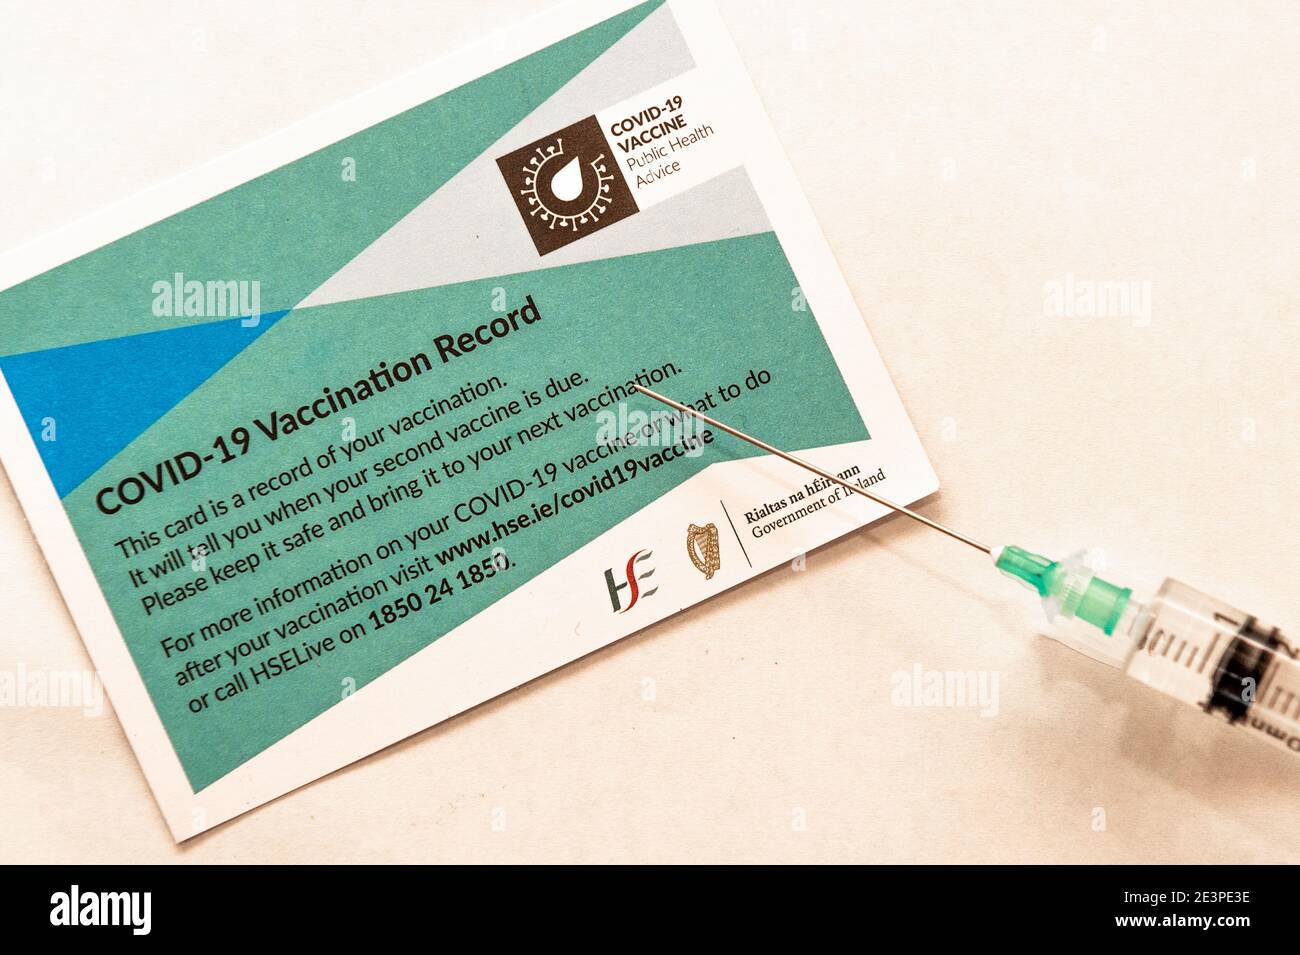 Syringe and a vaccination record card as part of the COVID-19 vaccine on a white background Stock Photo